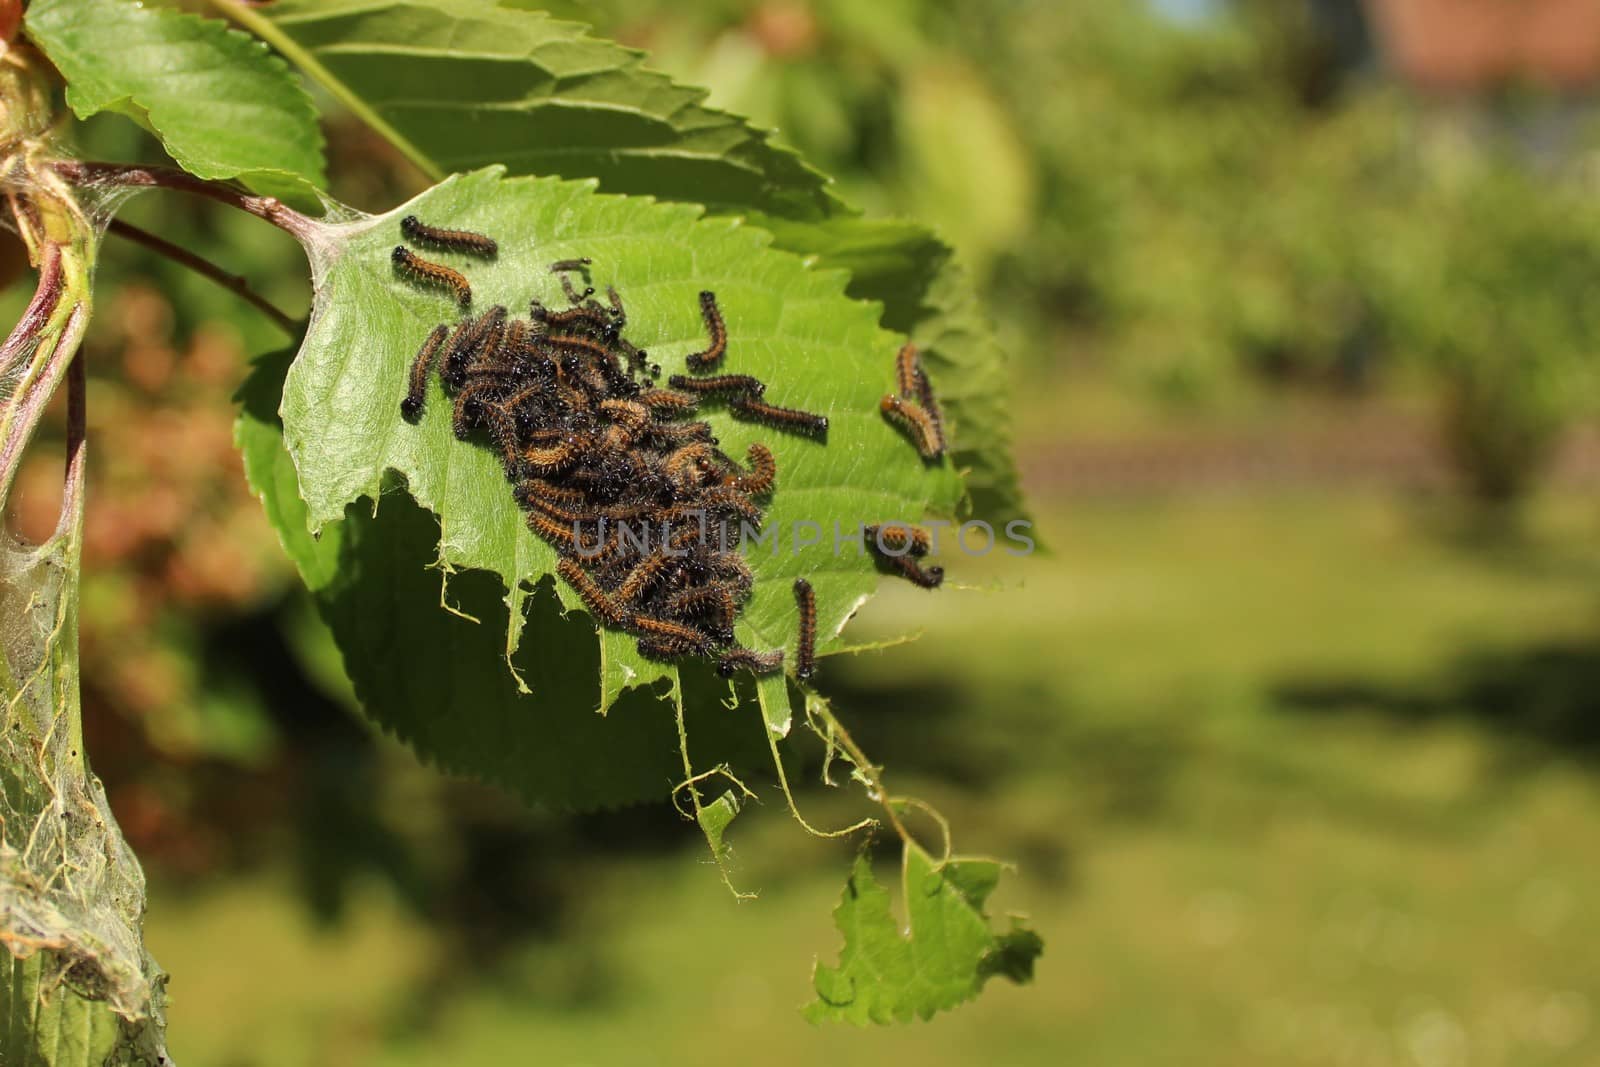 The picture shows caterpillars on a cherry tree.